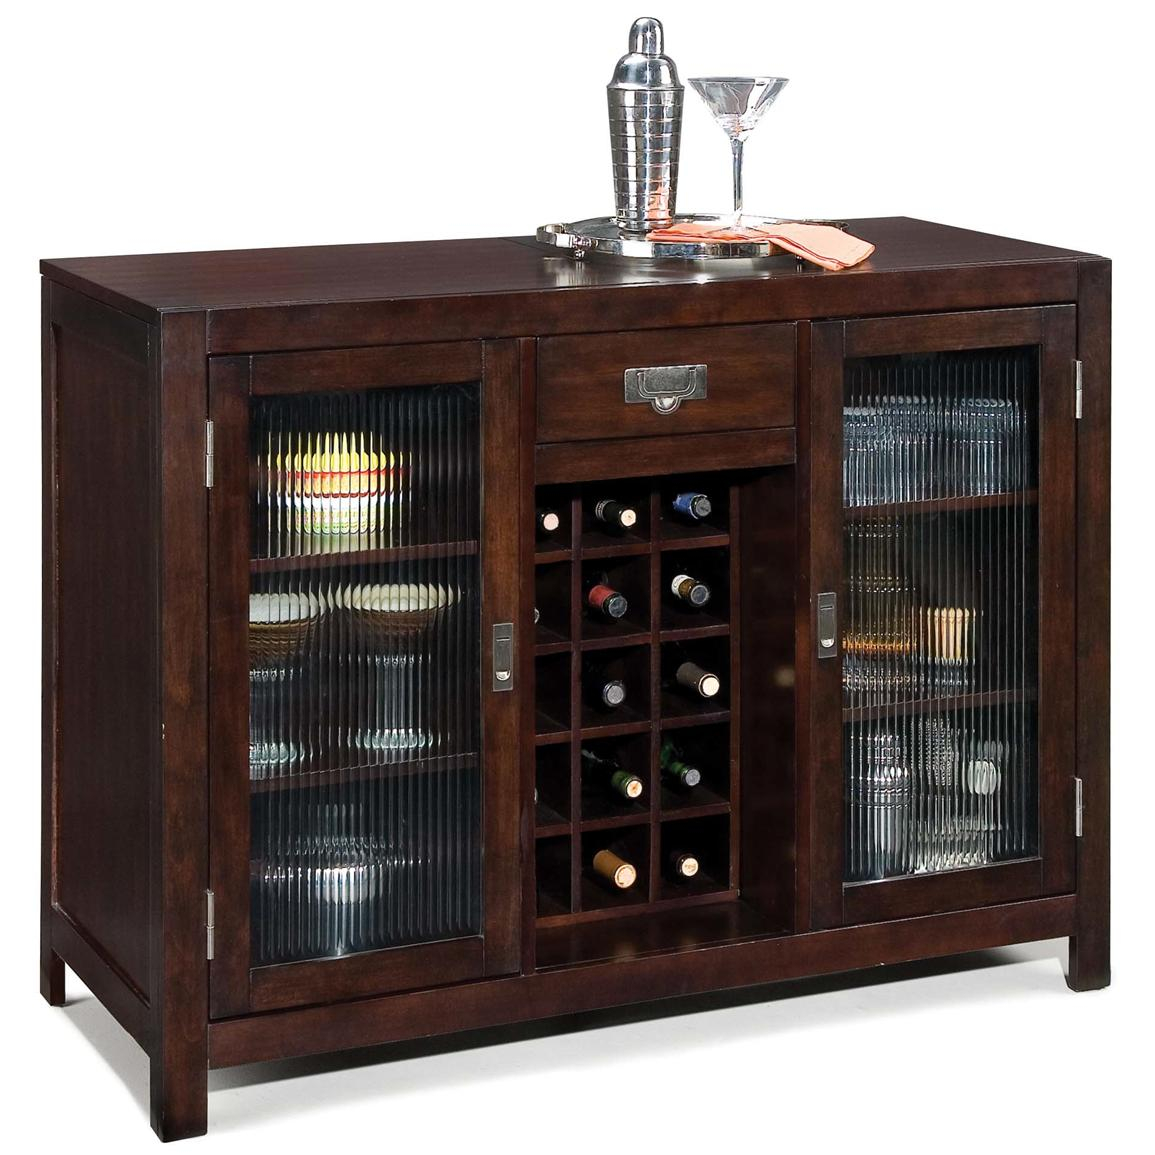 Home Styles City Chic Bar Cabinet Espresso 172179 intended for measurements 1155 X 1155